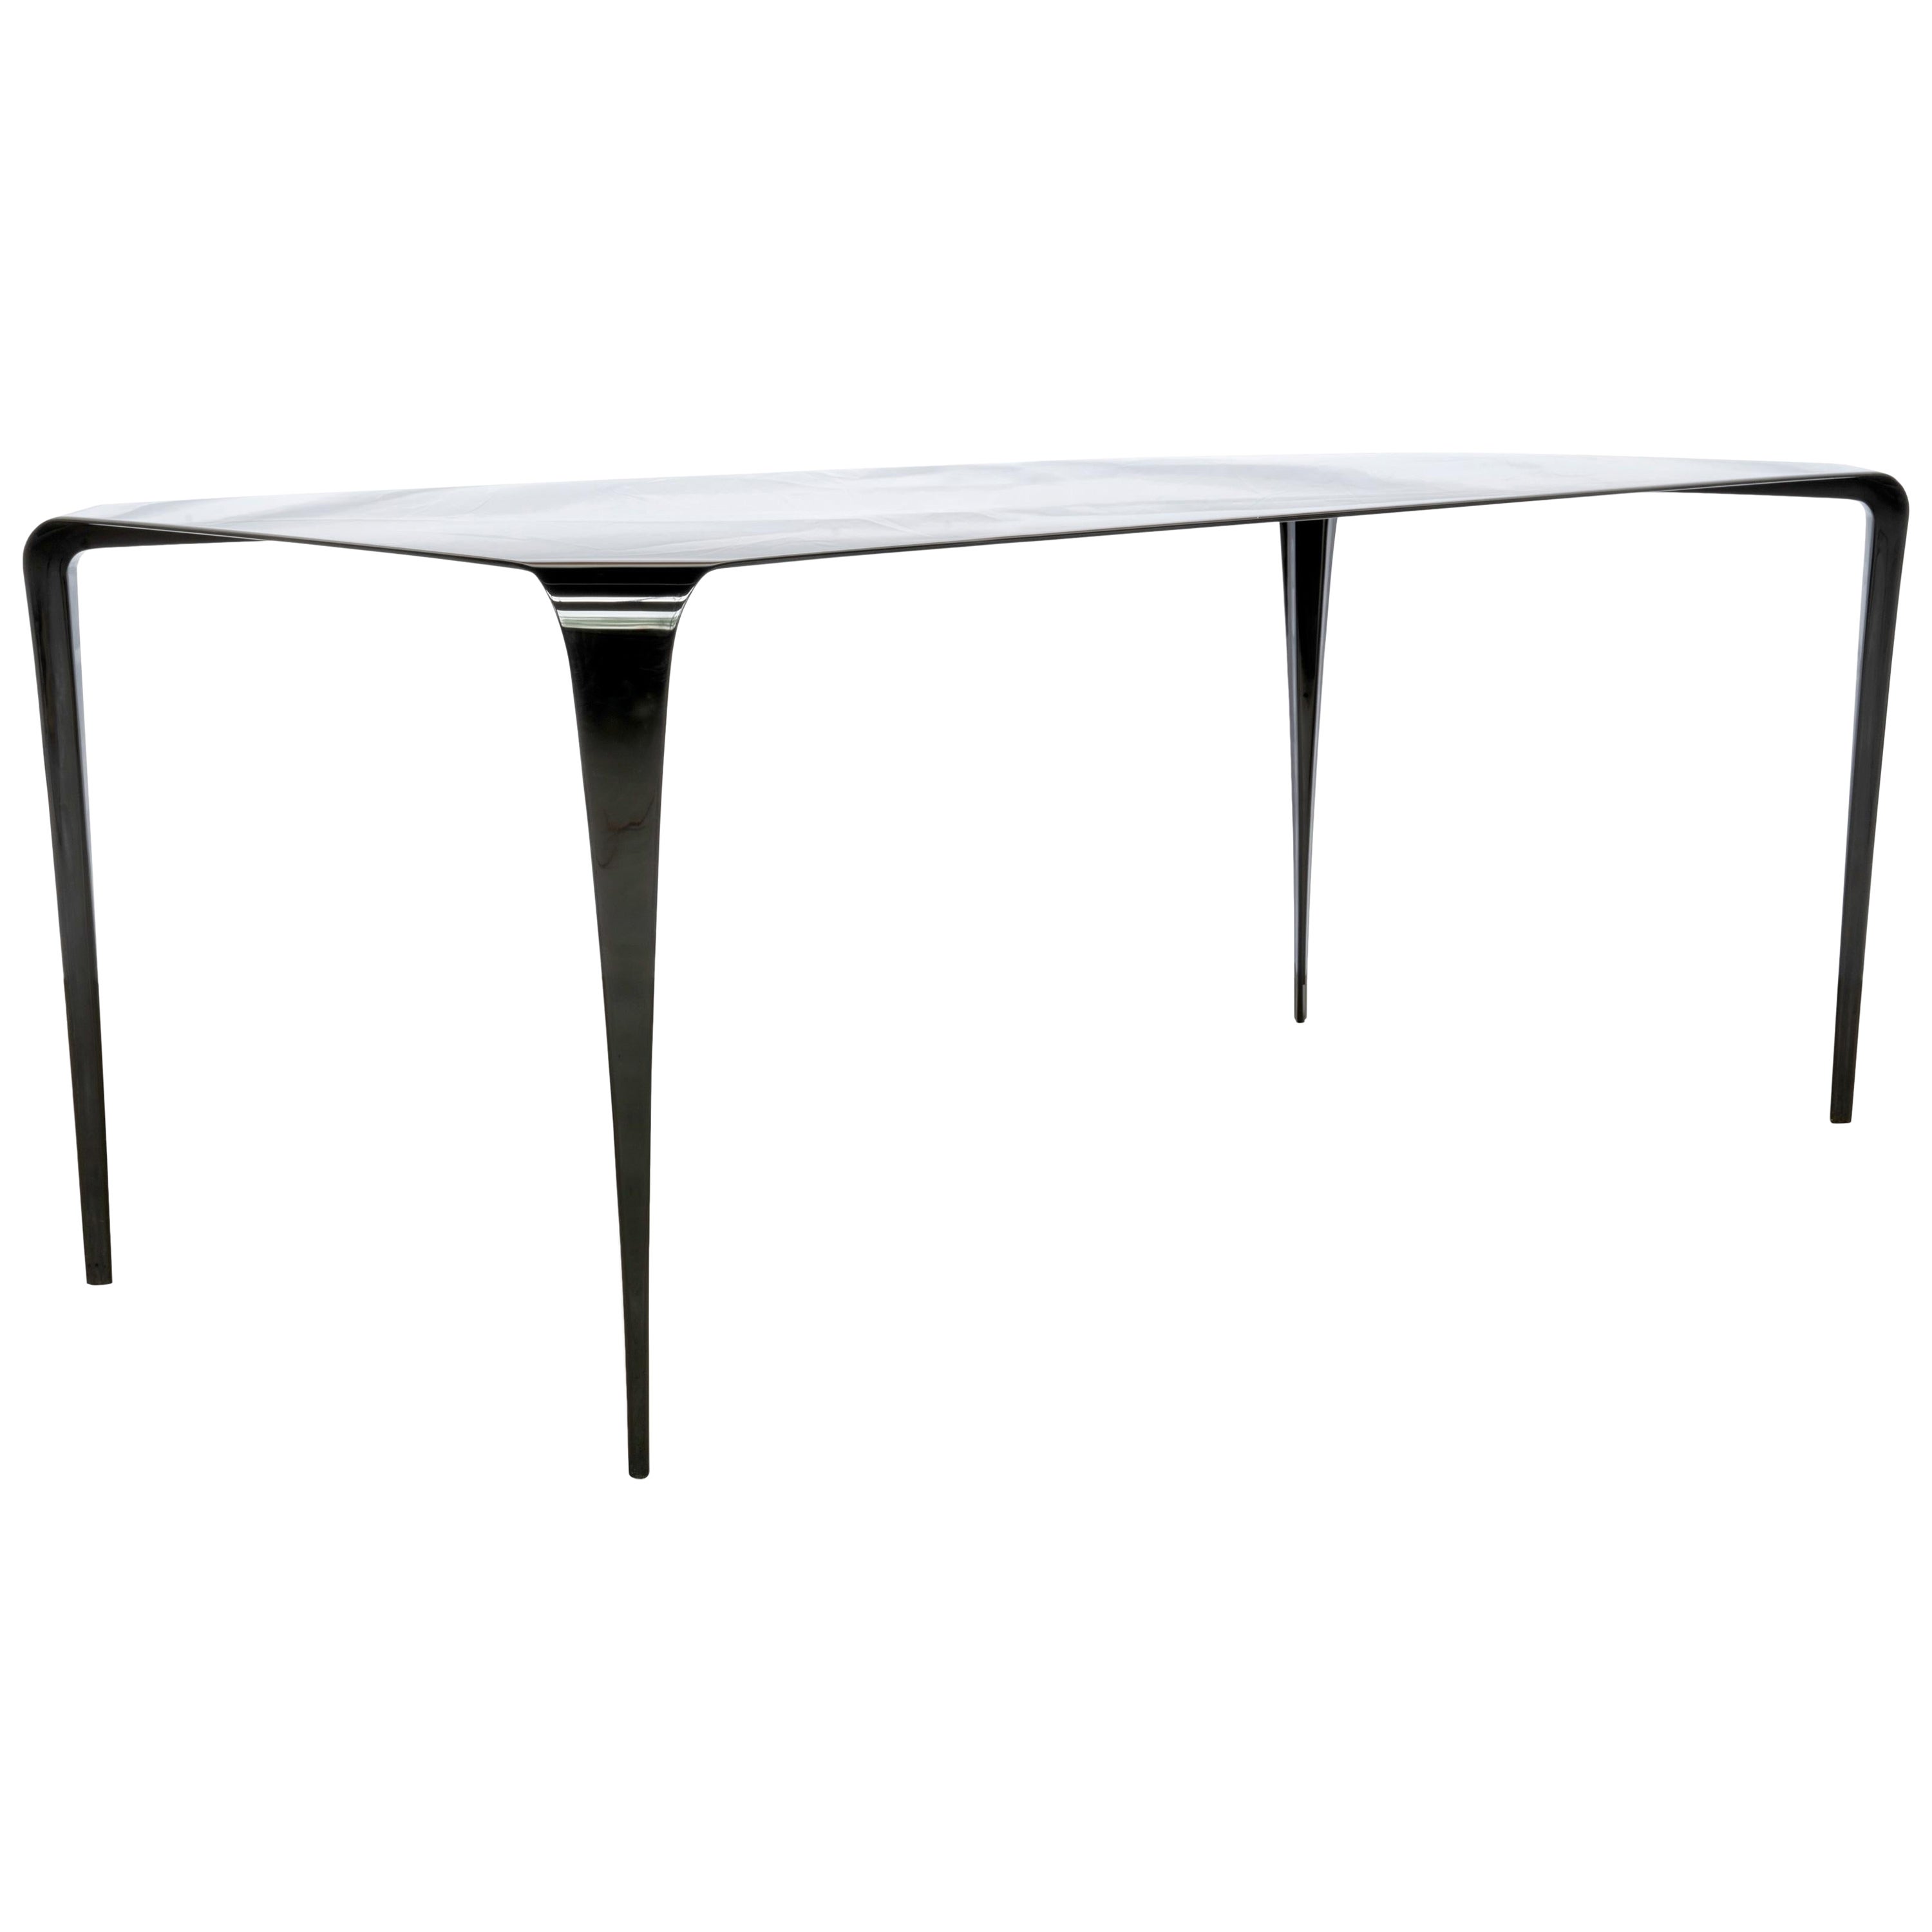 FLO - Metal dining room table with stiletto legs and custom finishes